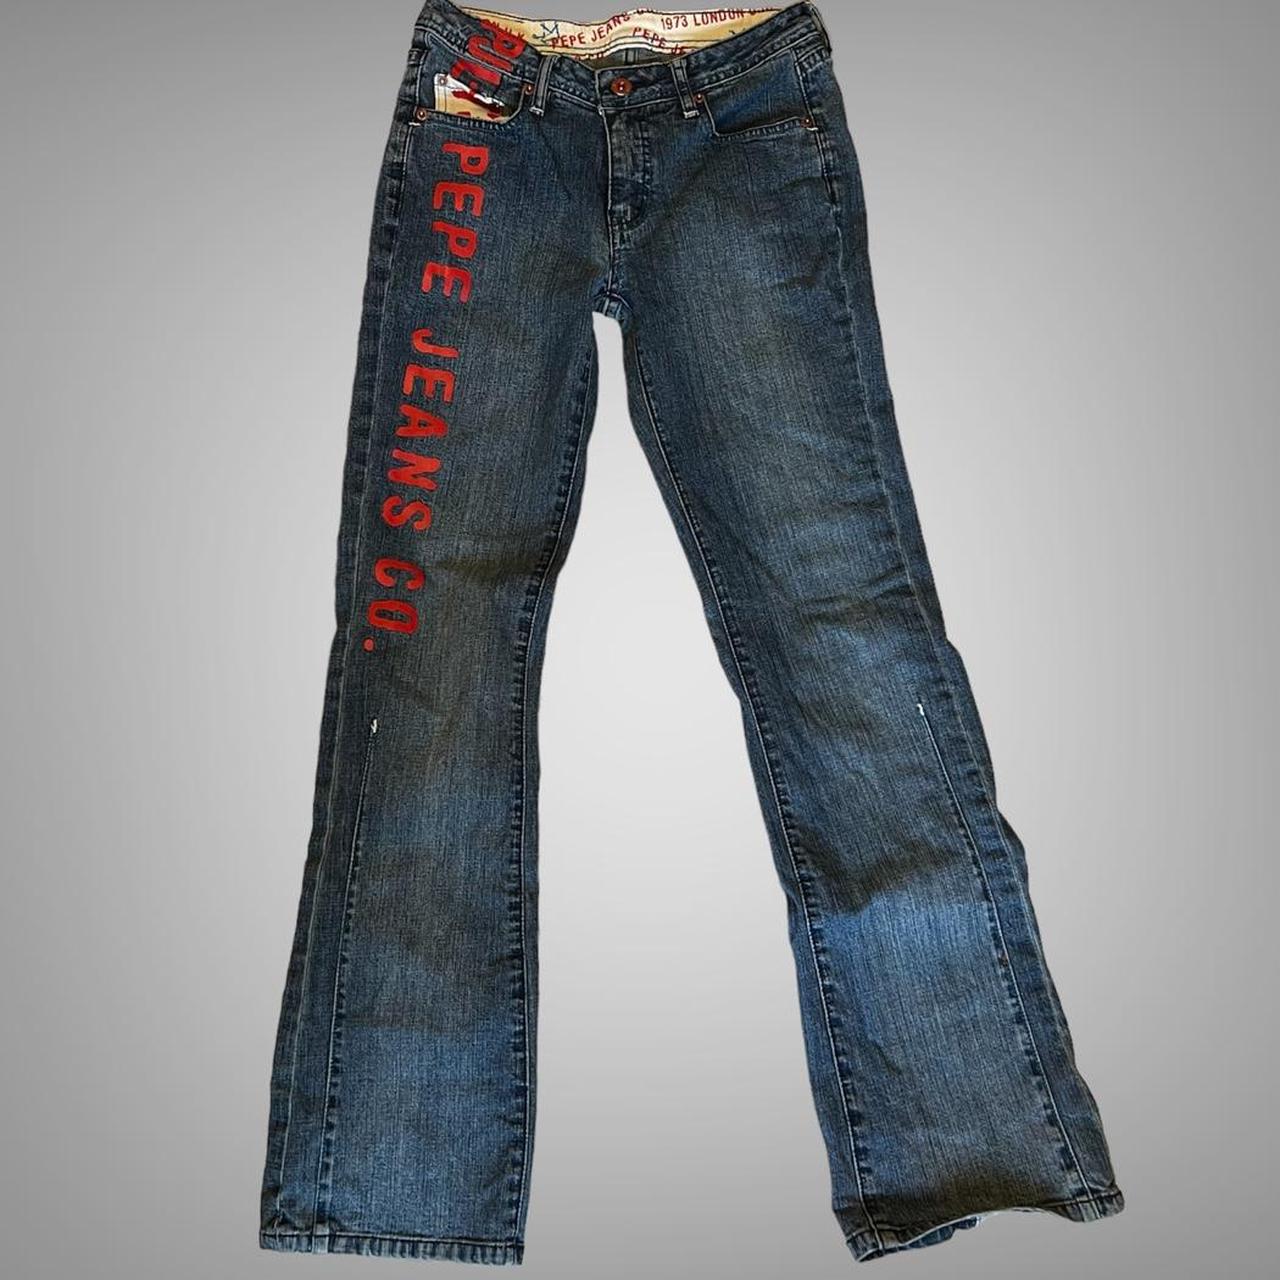 Pepe Jeans Women's Red and Blue Jeans